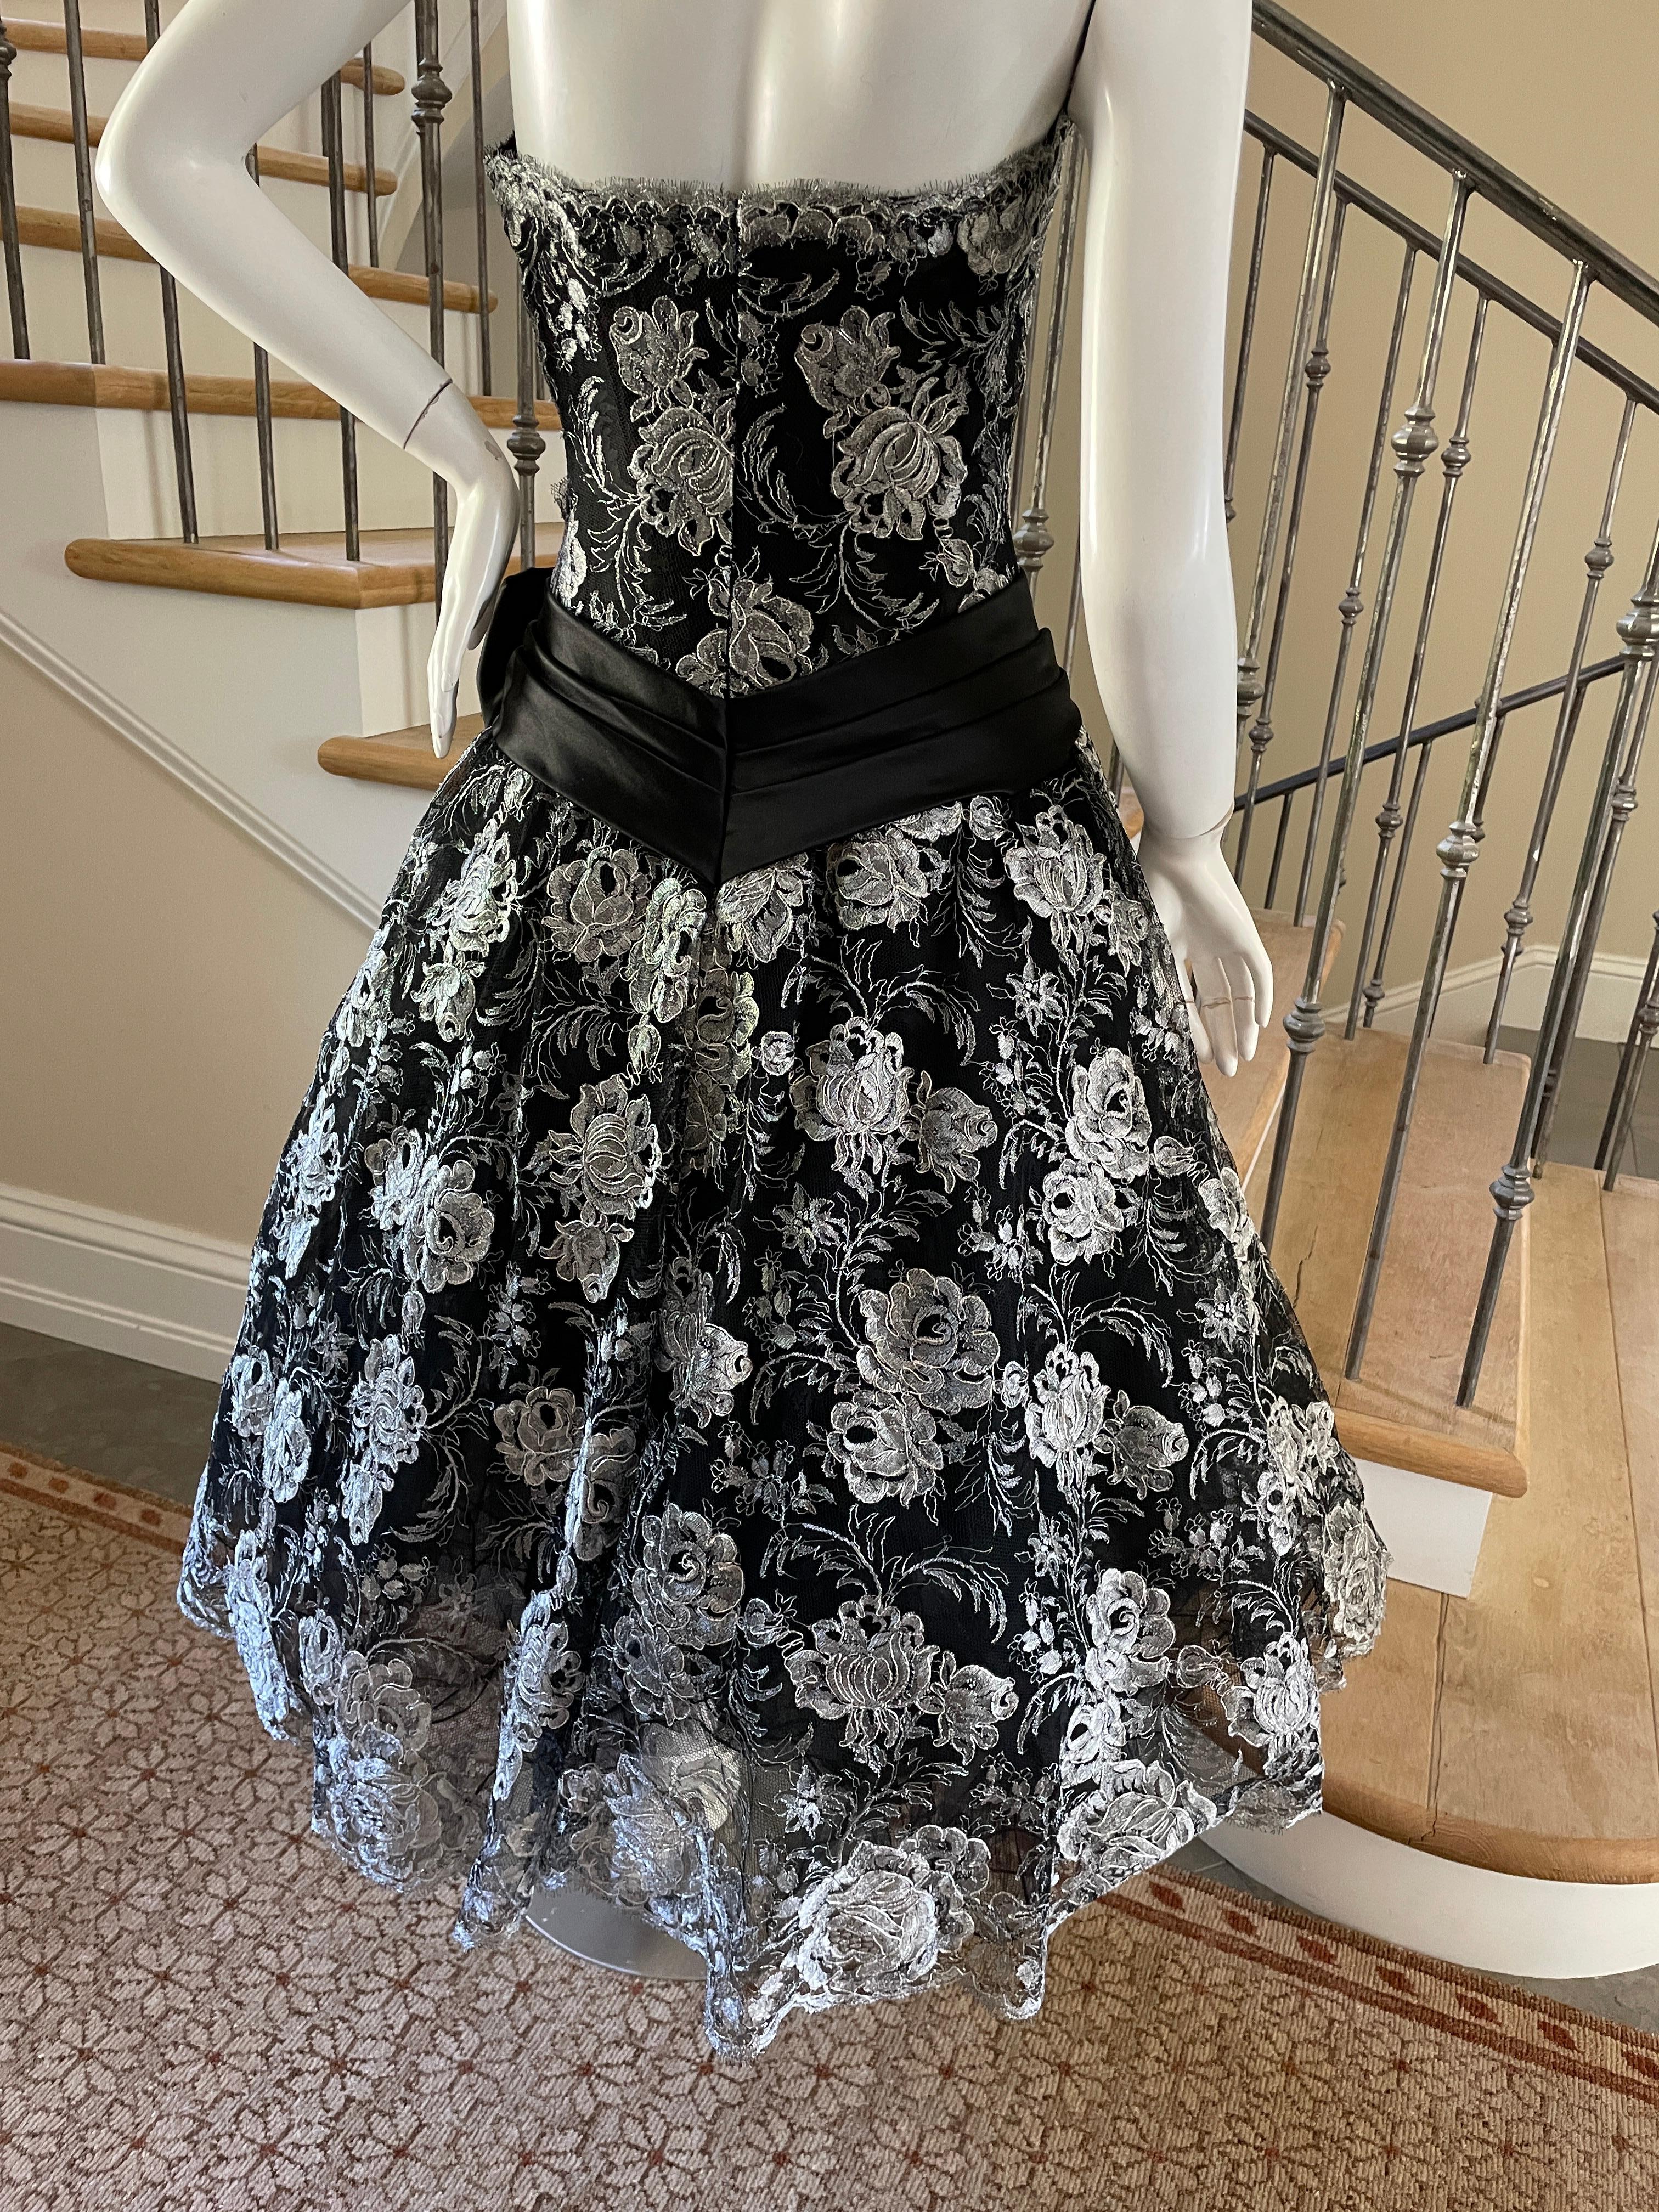 Vicky Tiel Couture Paris for Bergdorf Goodman Silver Lace Corset Cocktail Dress.
This is so pretty, metallic silver lace on black  tulle with a complete corset bust, with multiple petticoat skirts,
Size 40
 Bust 34